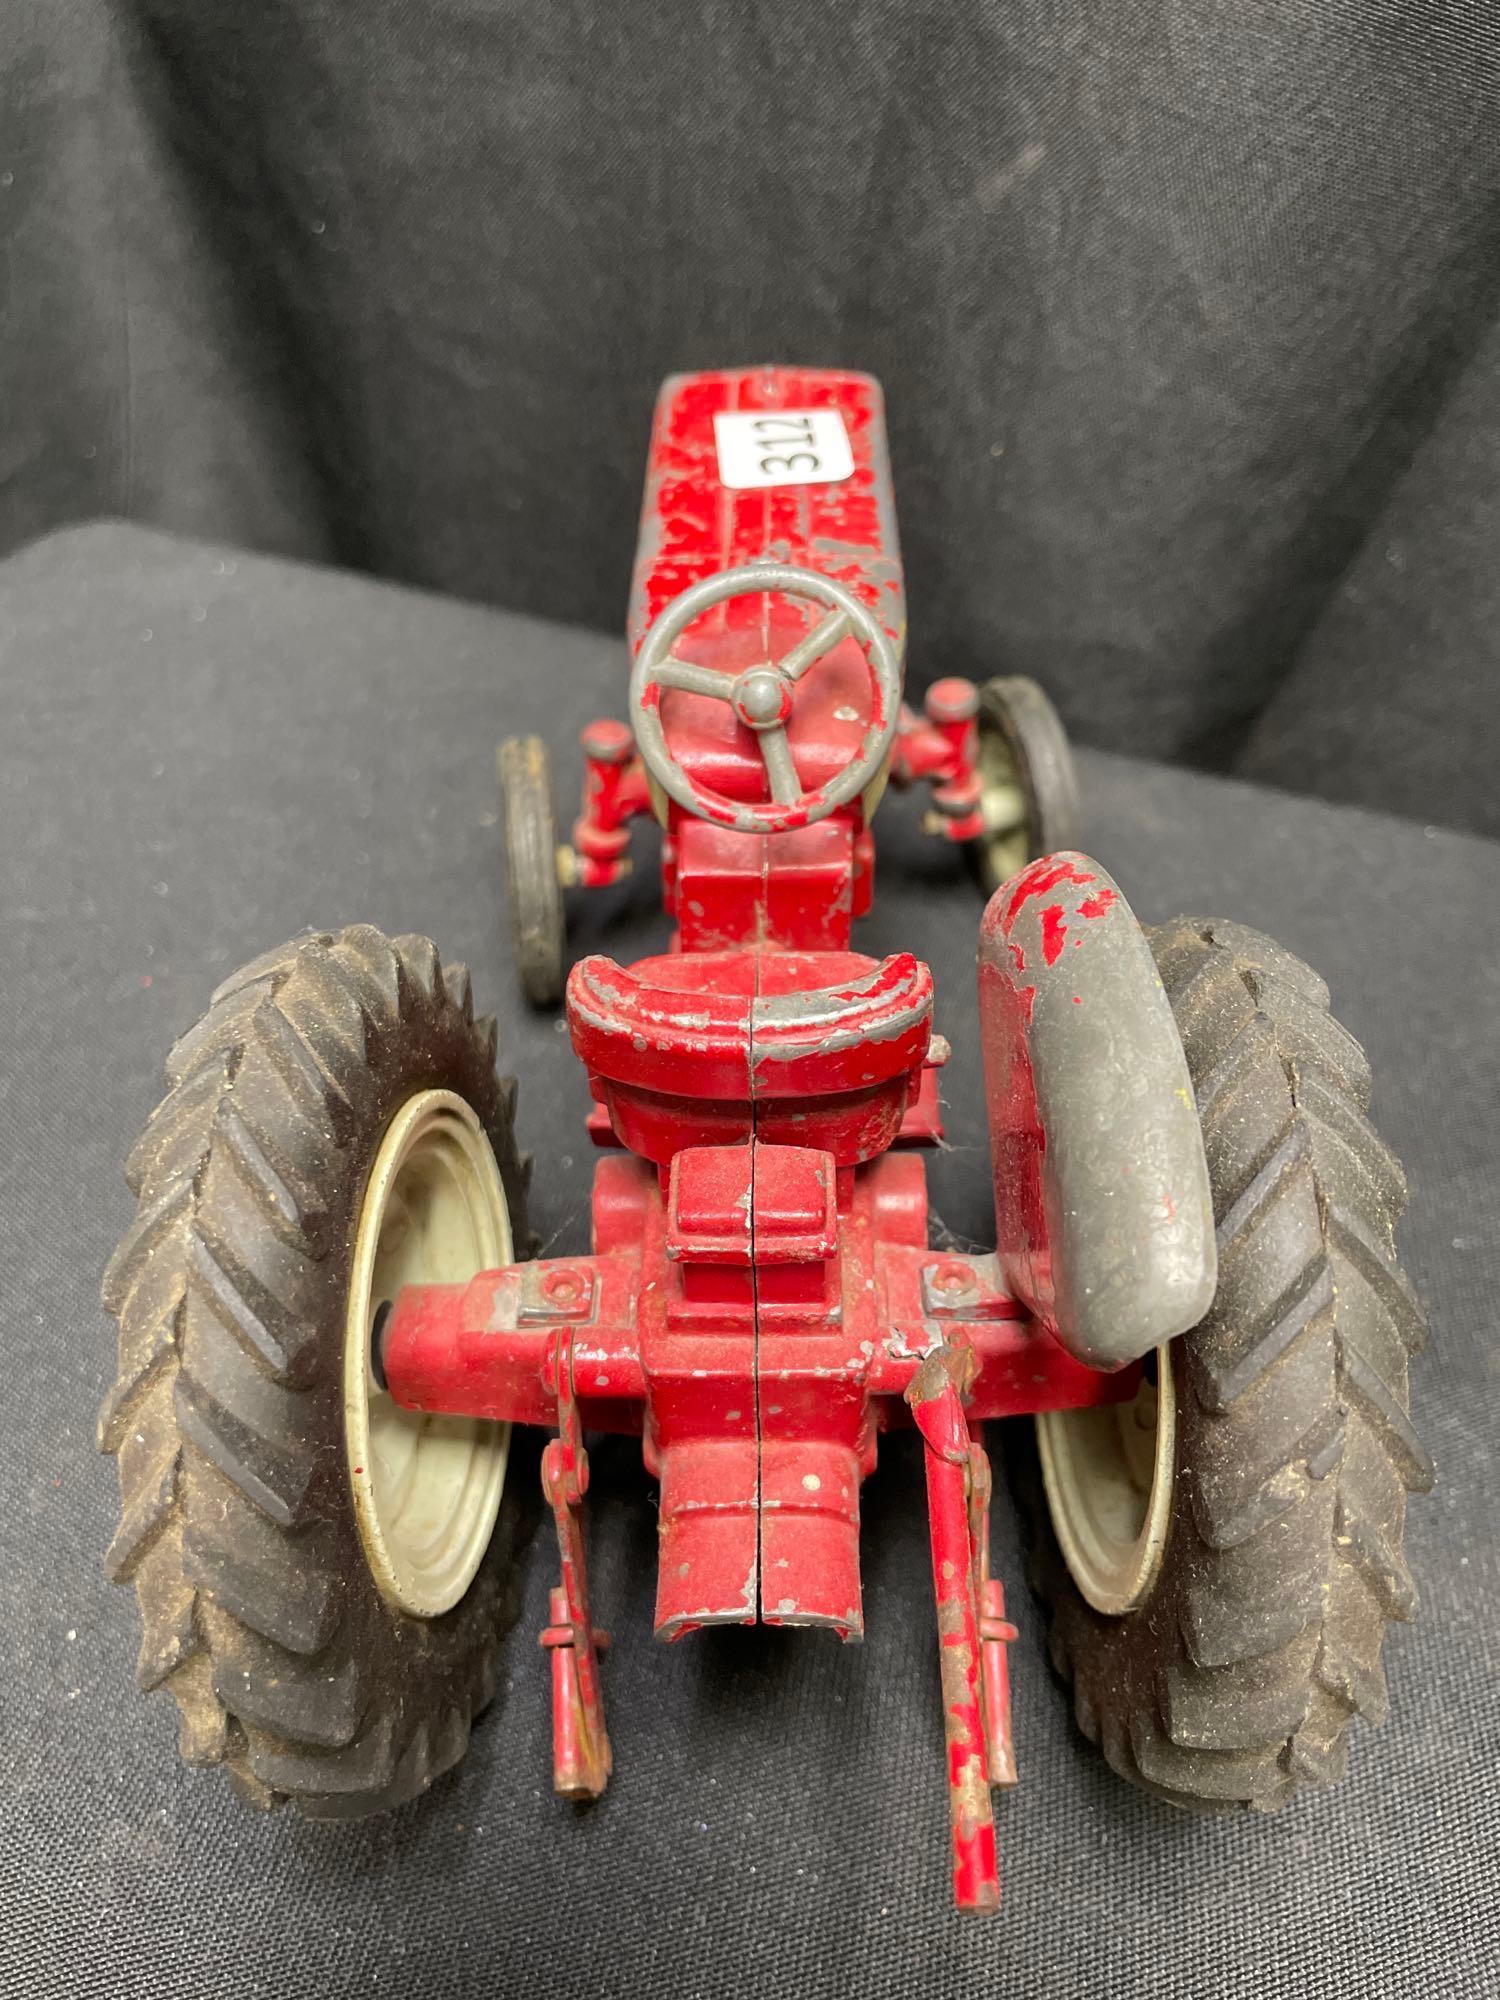 1/16th Scale Ertl IH 340 Utility Tractor with 2 pt. hitch - Left rear fender missing